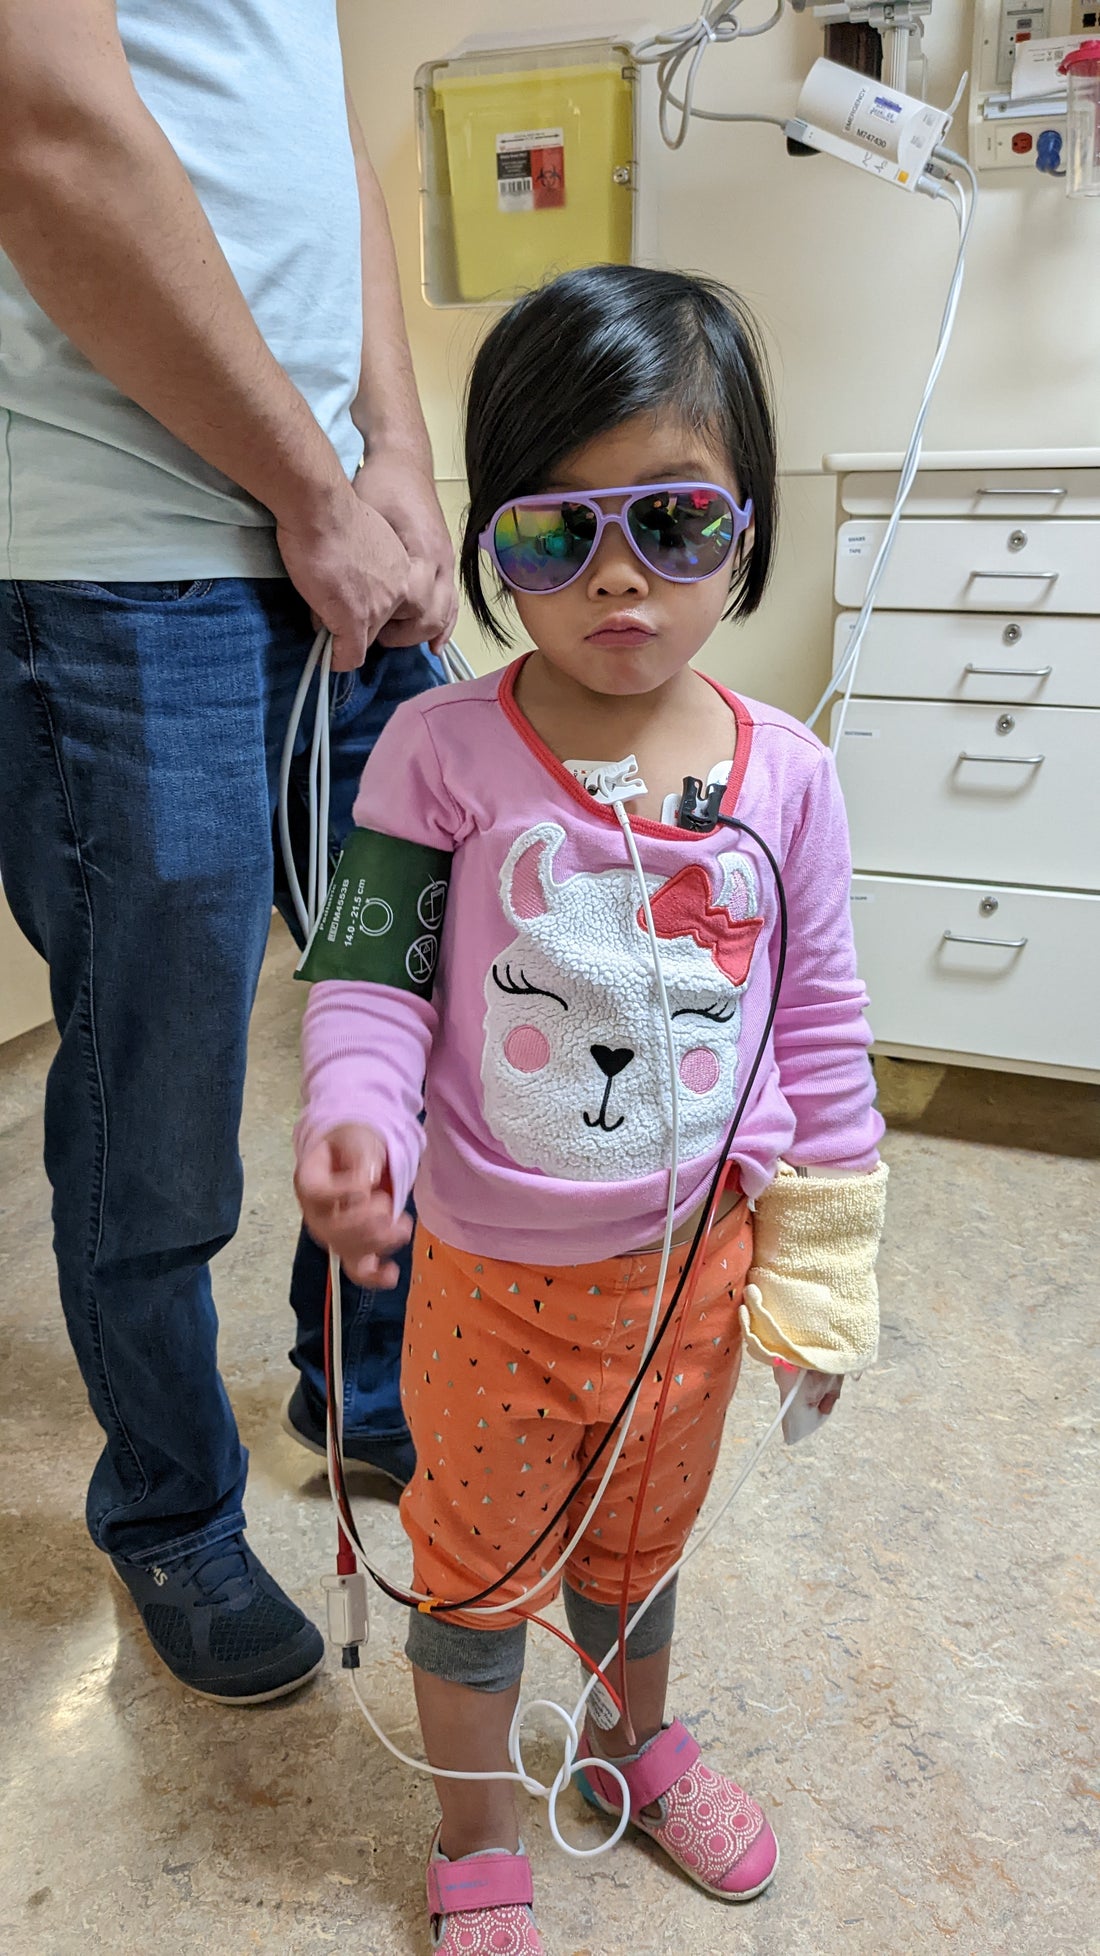 3 year old at the children's hospital after a febrile seizure, hooked up to wires